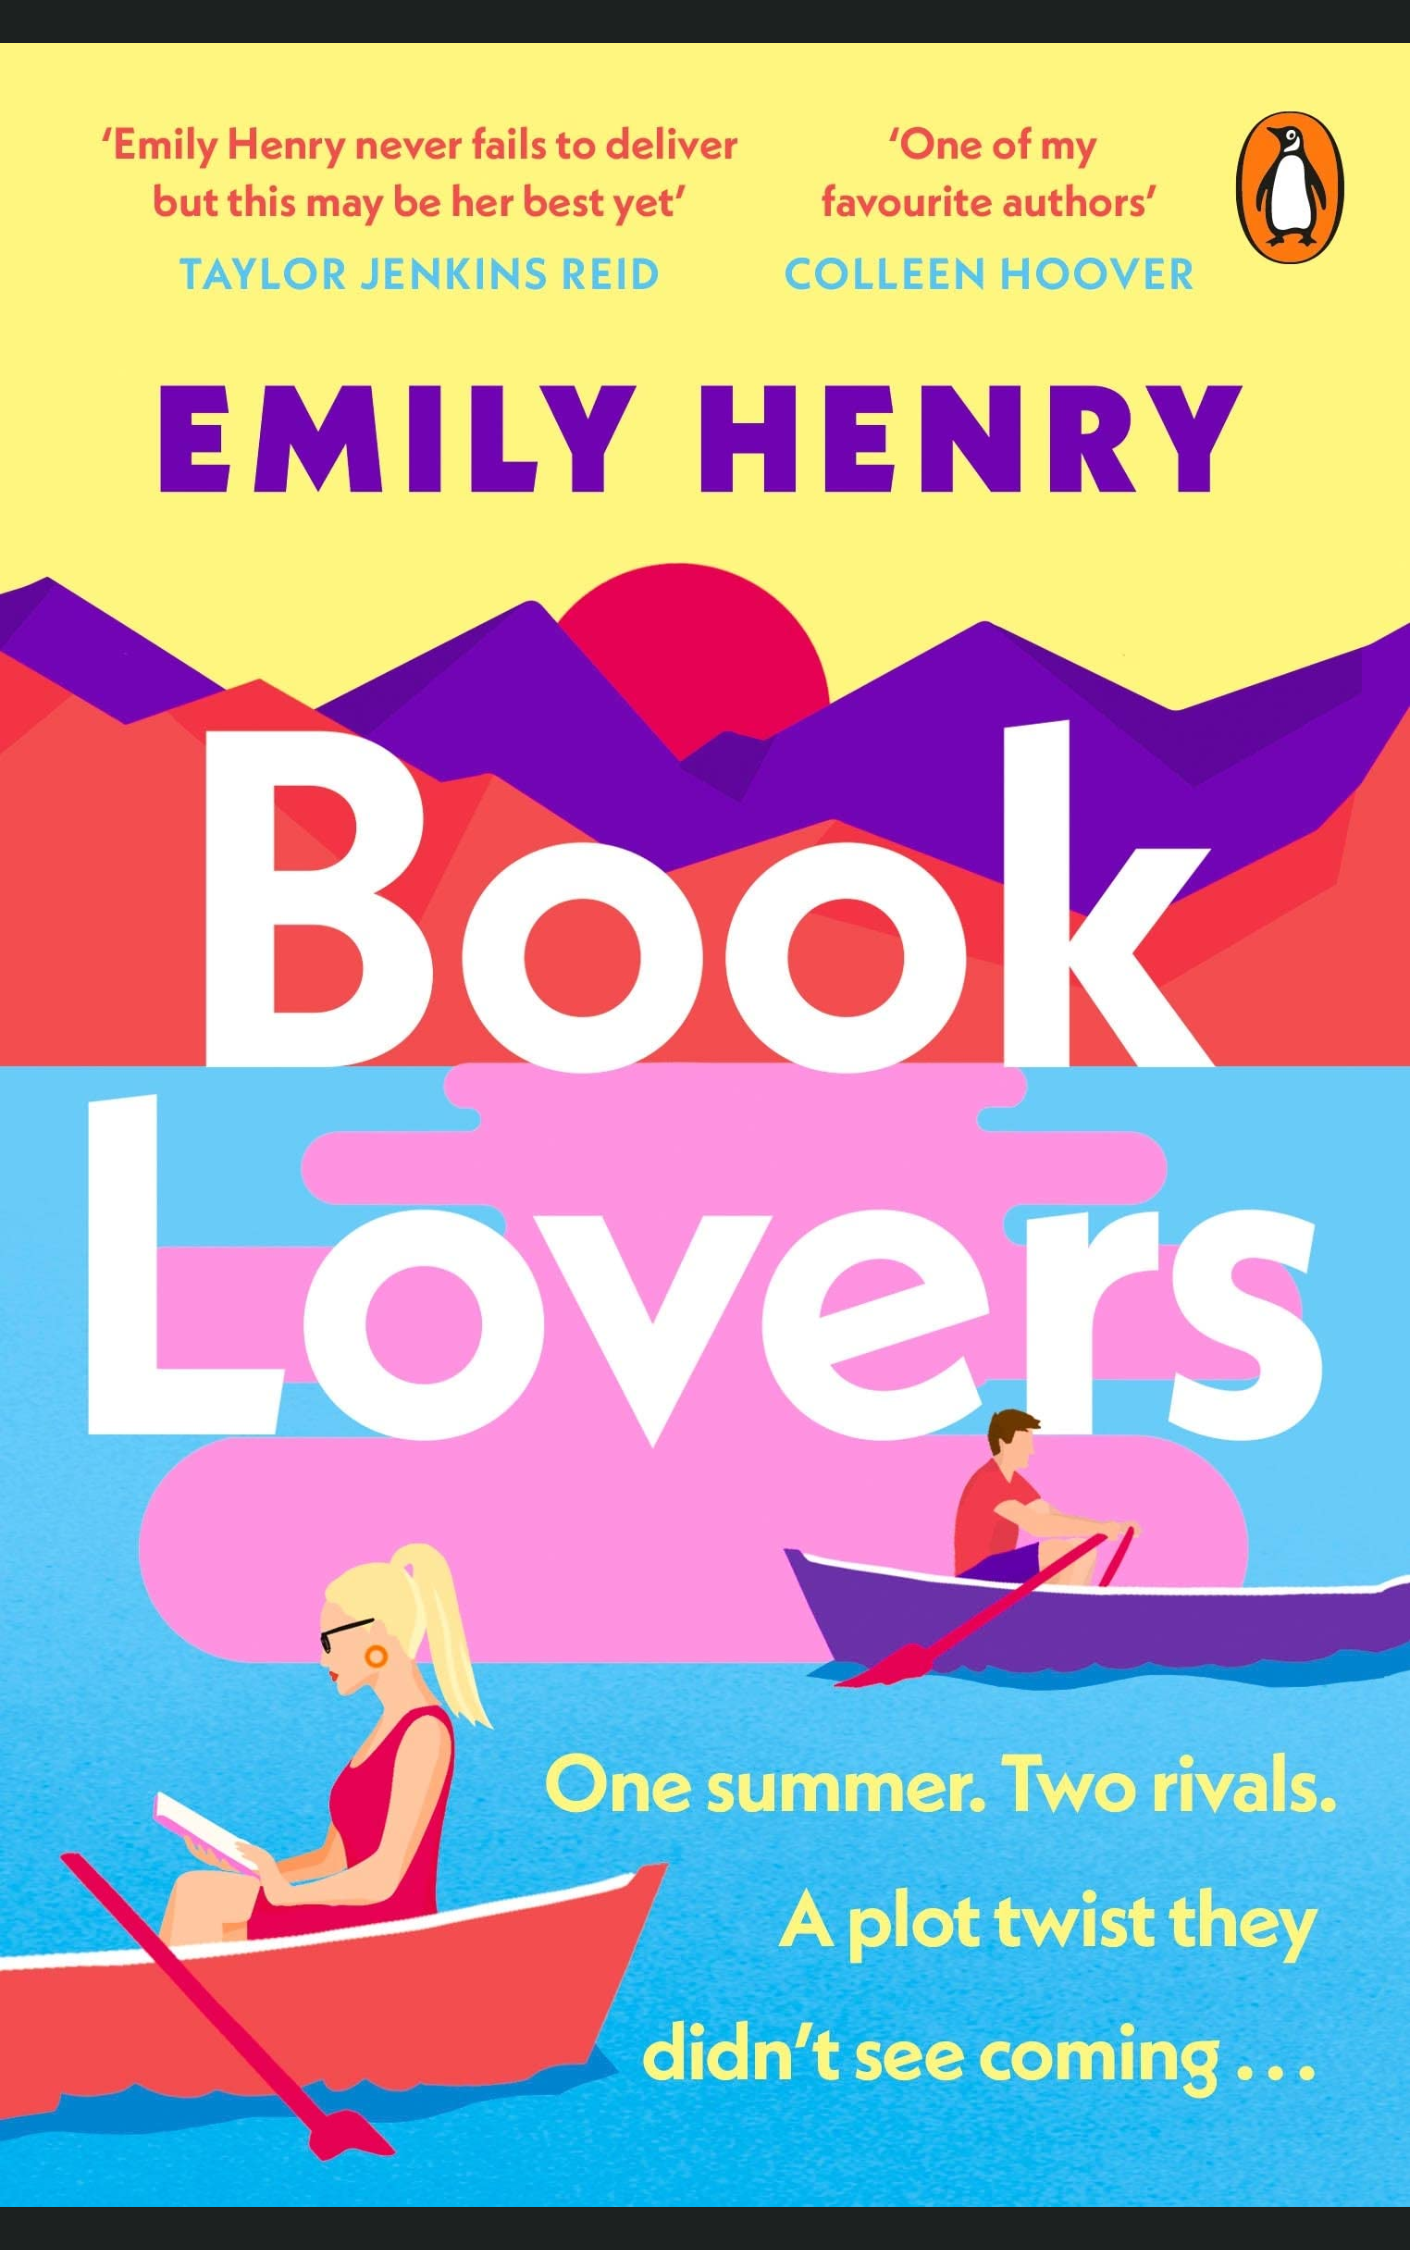 BOOK LOVERS by EMILY HENRY